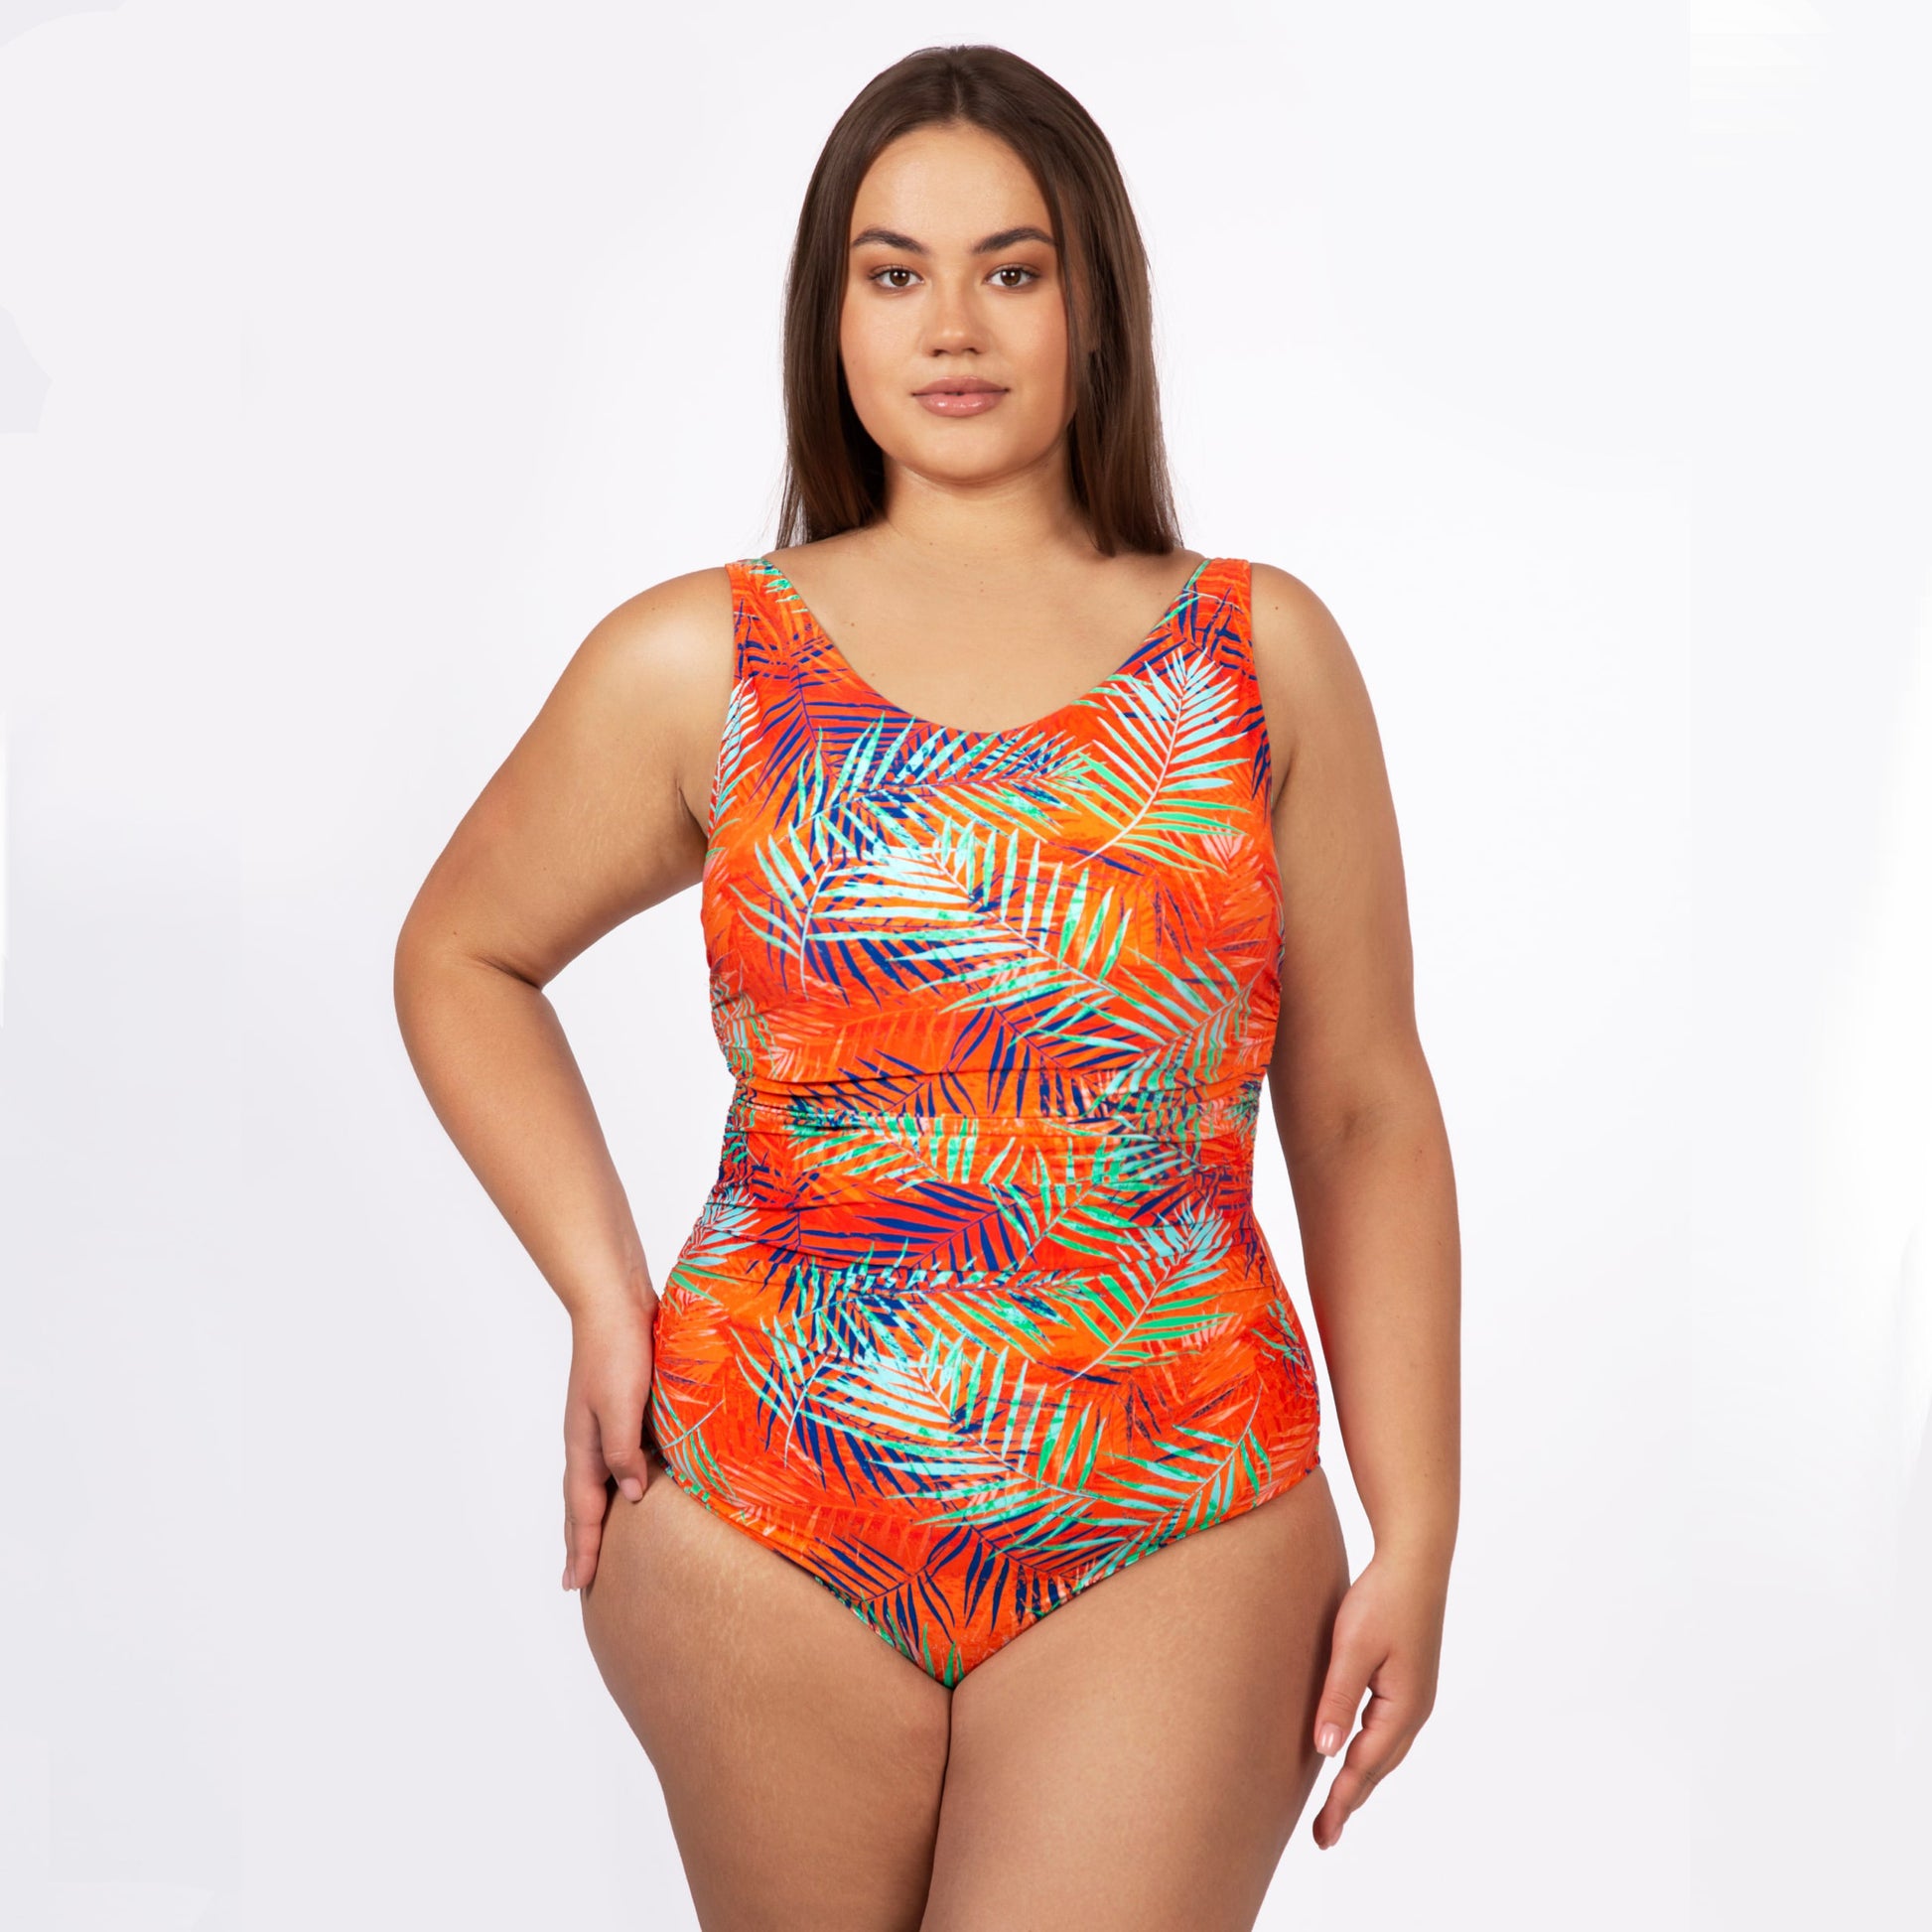 Fouetté Swimsuit | Mastectomy Swimwear by Megami Lingerie